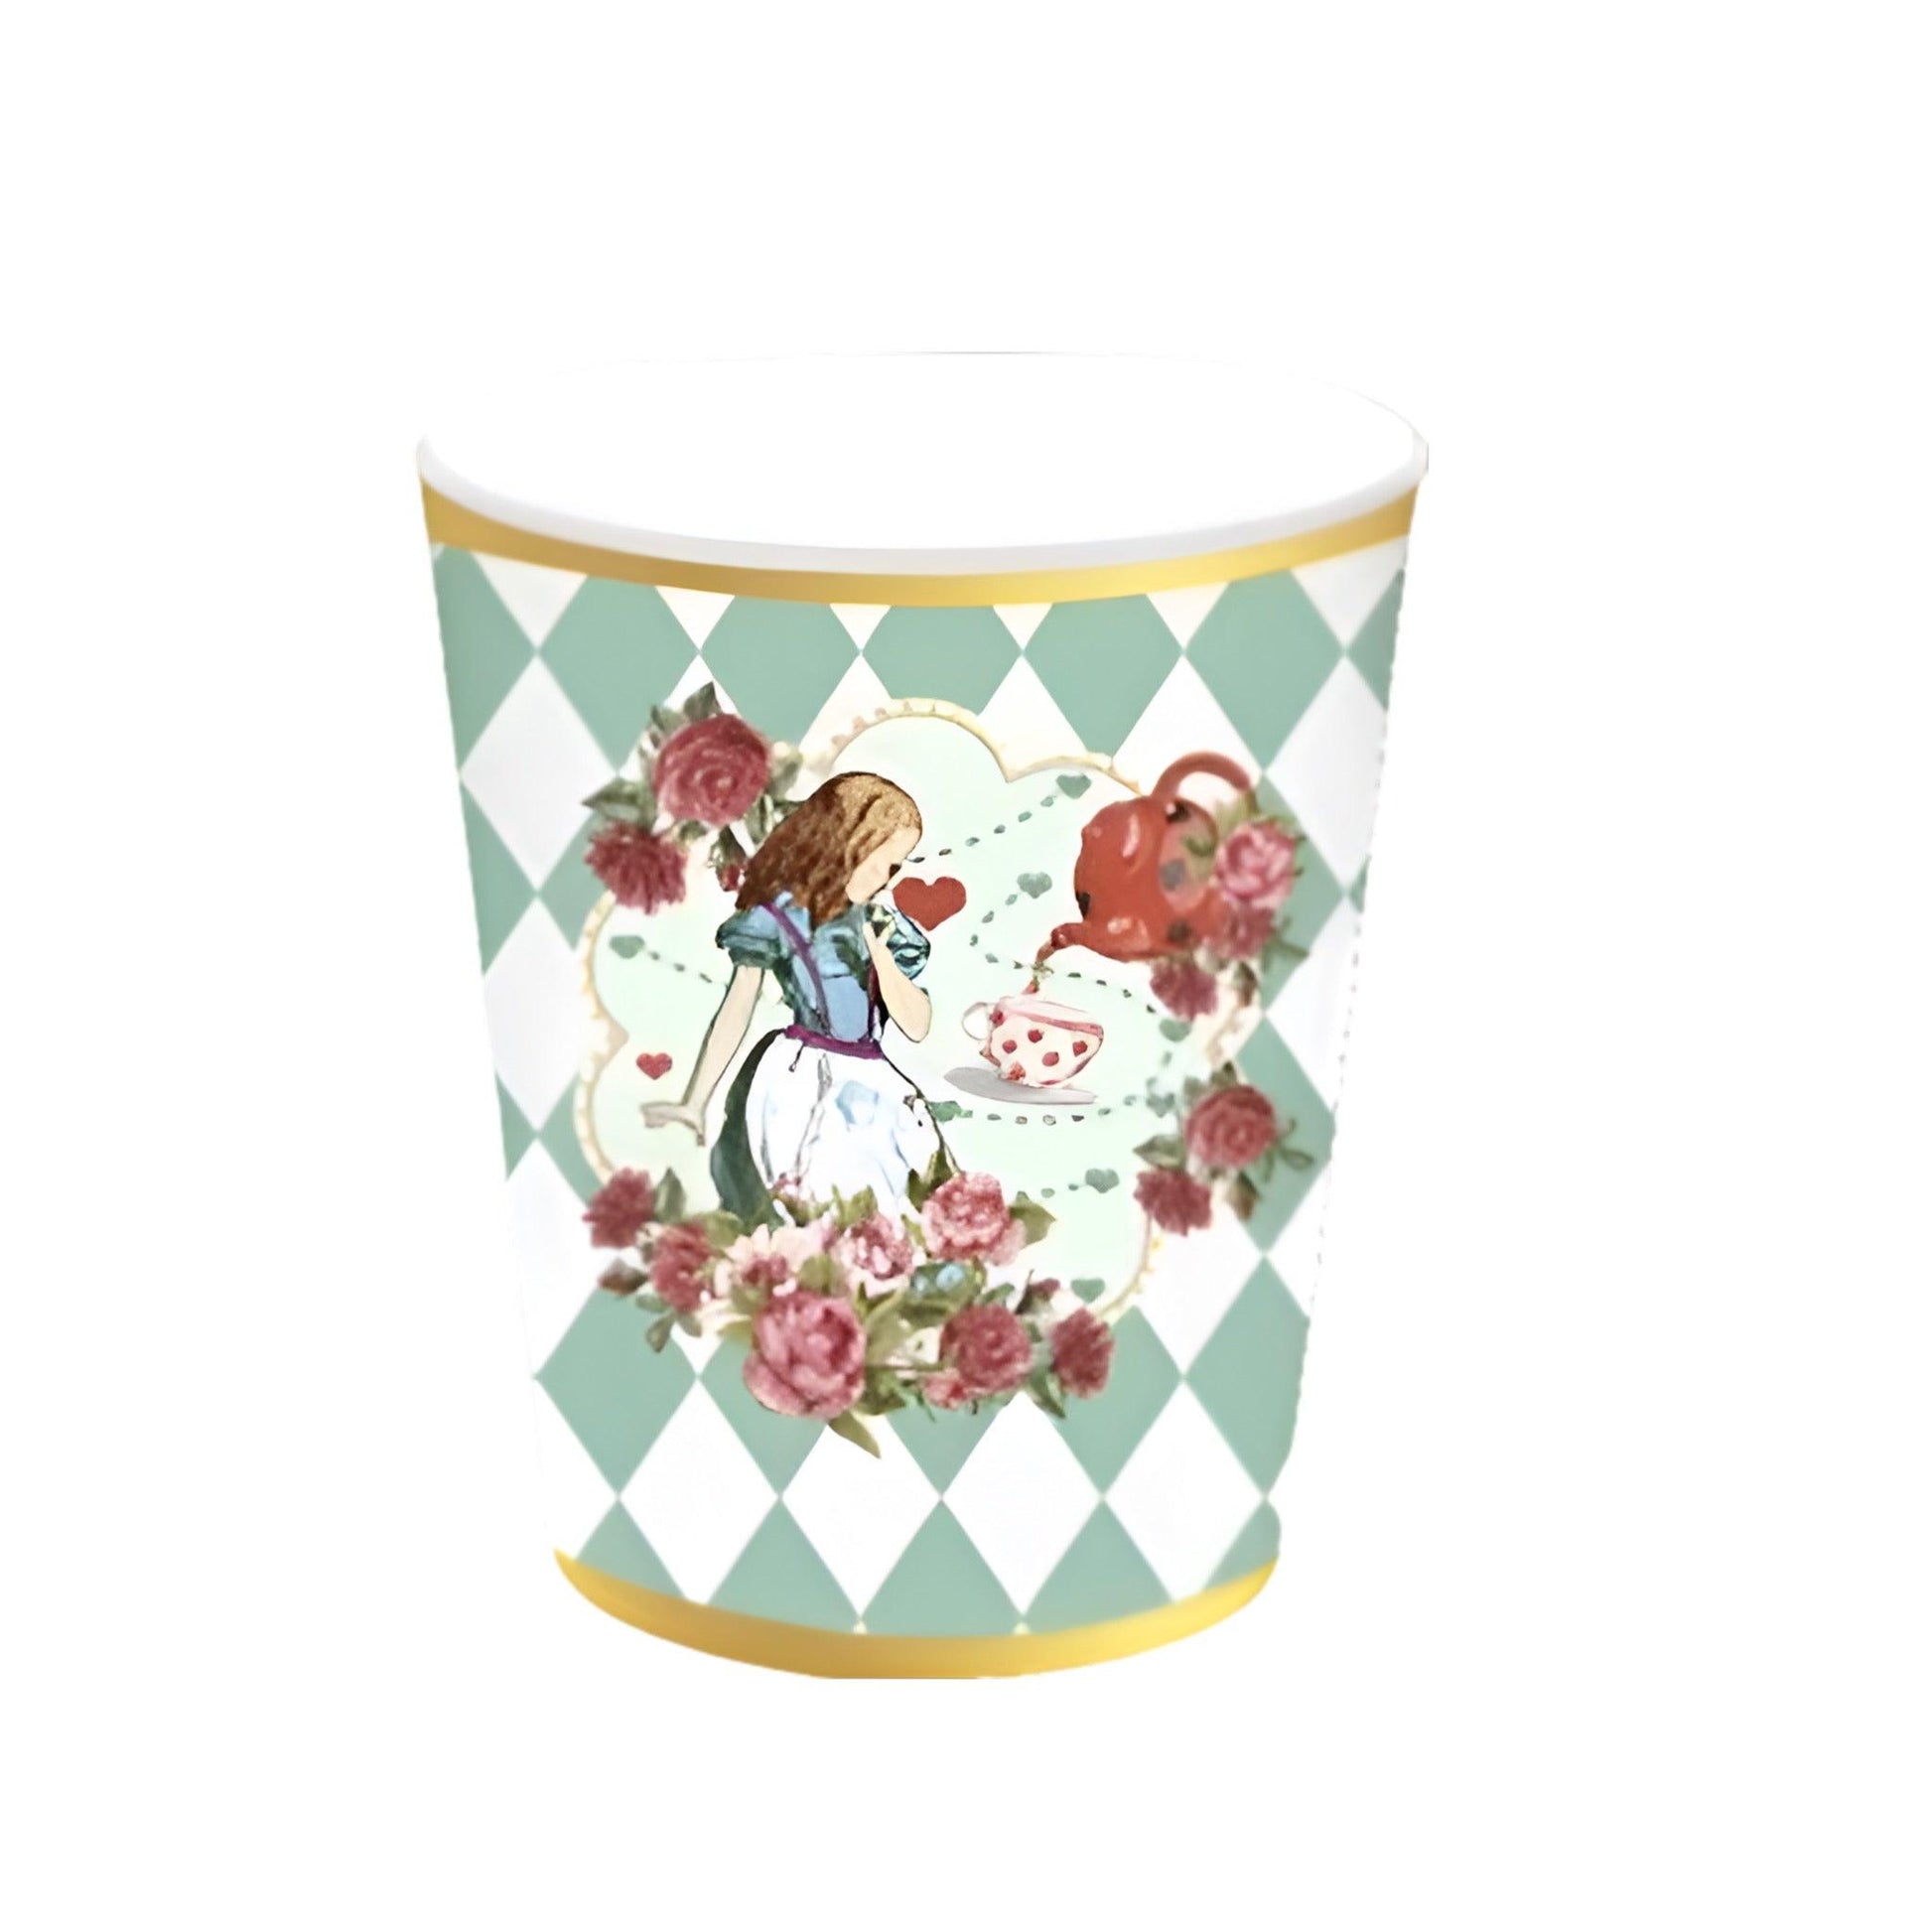 Alice in Wonderland Cup with green diamond pattern, Alice, red roses and teapot